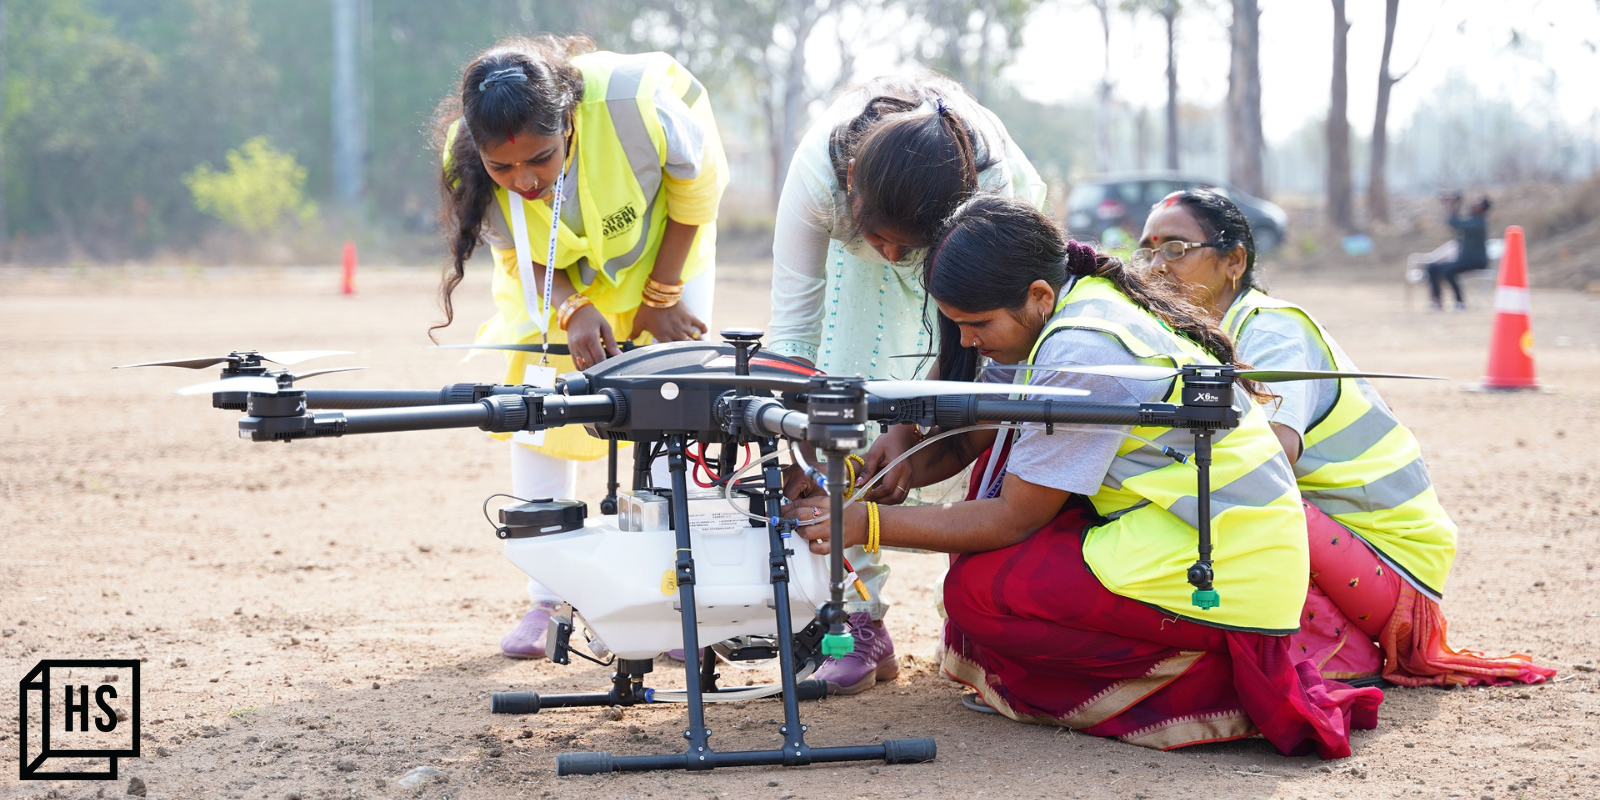 Flying high: how the drone didi initiative is empowering women in rural areas